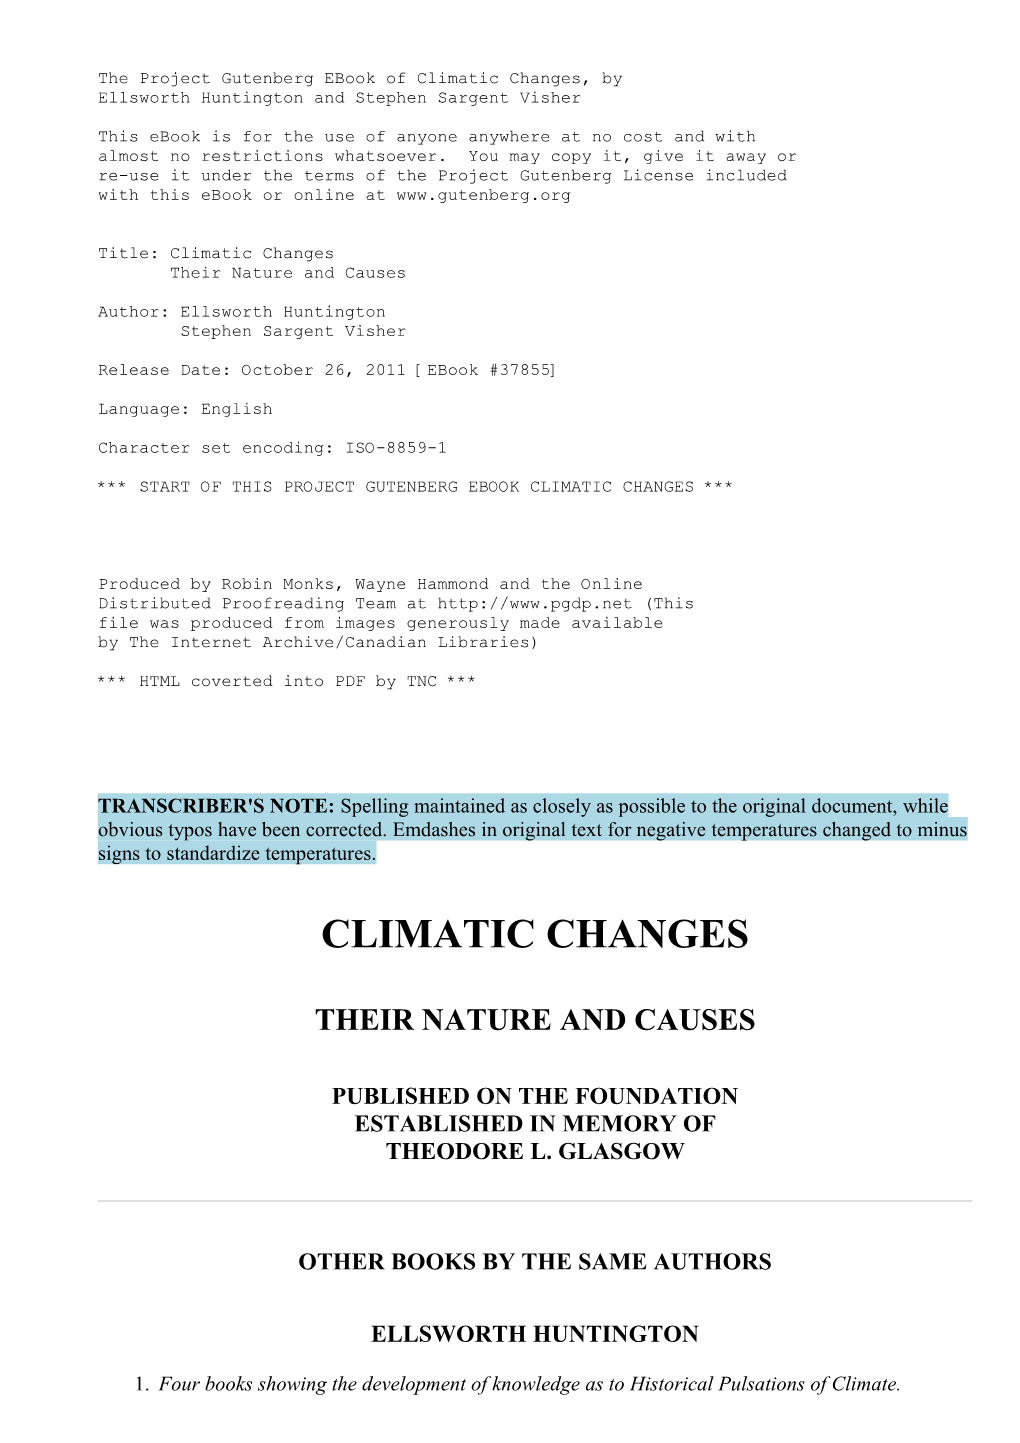 The Project Gutenberg Ebook of Climatic Changes, by Ellsworth Huntington and Stephen Sargent Visher